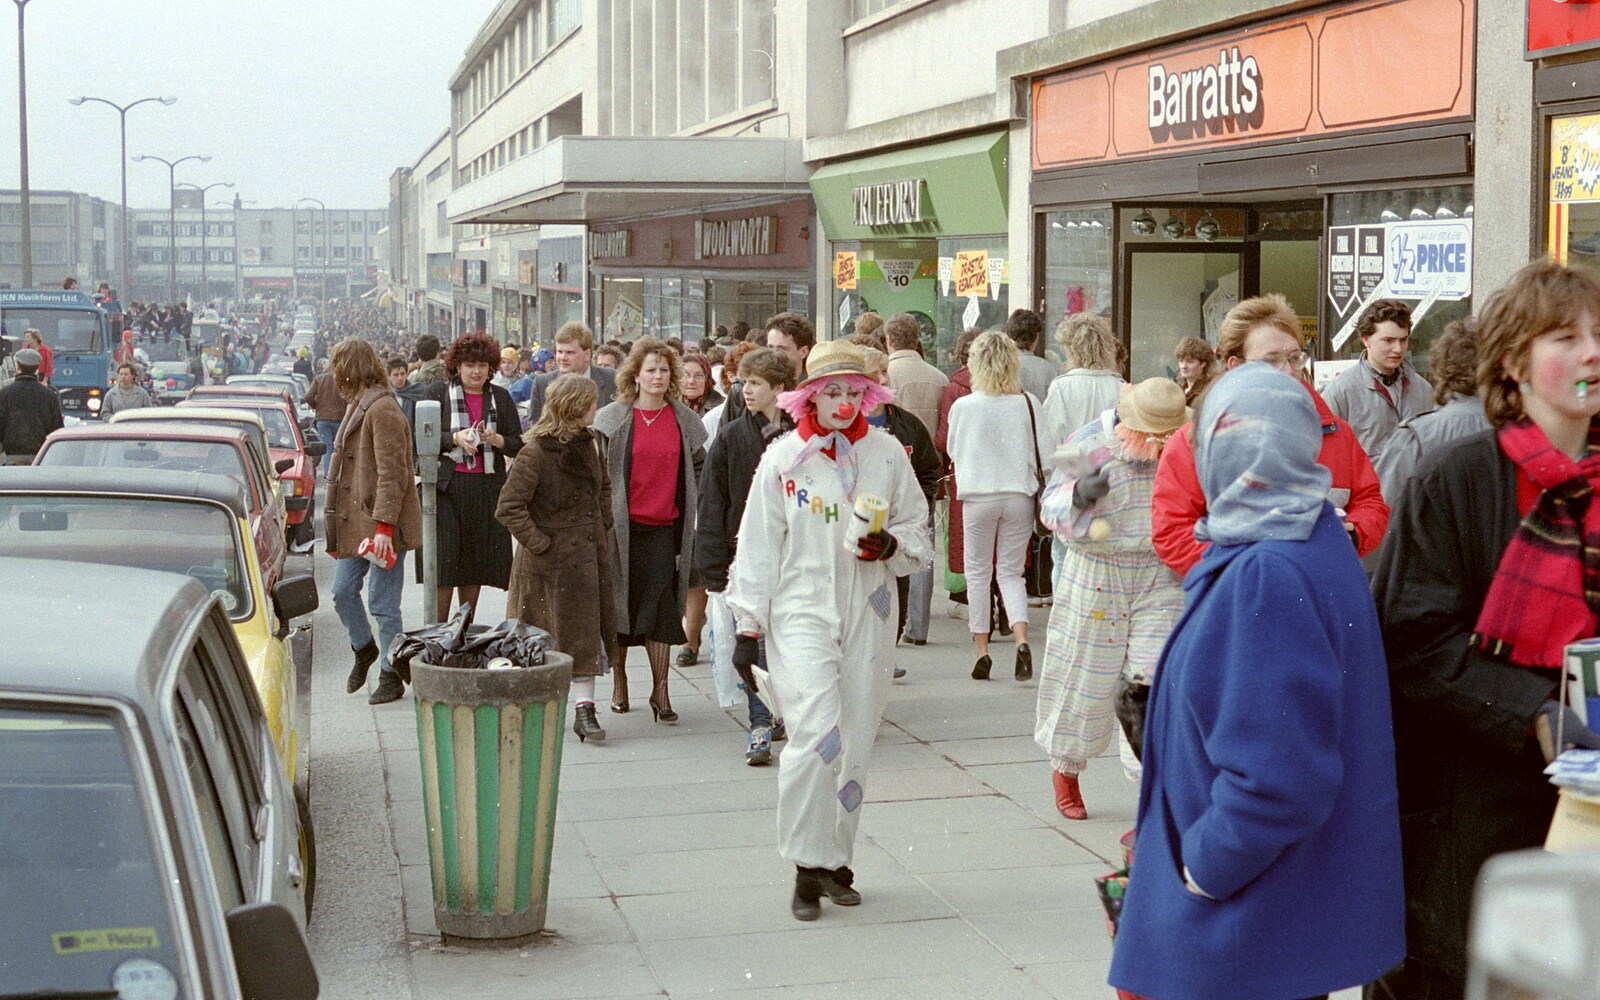 A packed New George Street from Uni: PPSU "Jazz" RAG Street Parade, Plymouth, Devon - 17th February 1986